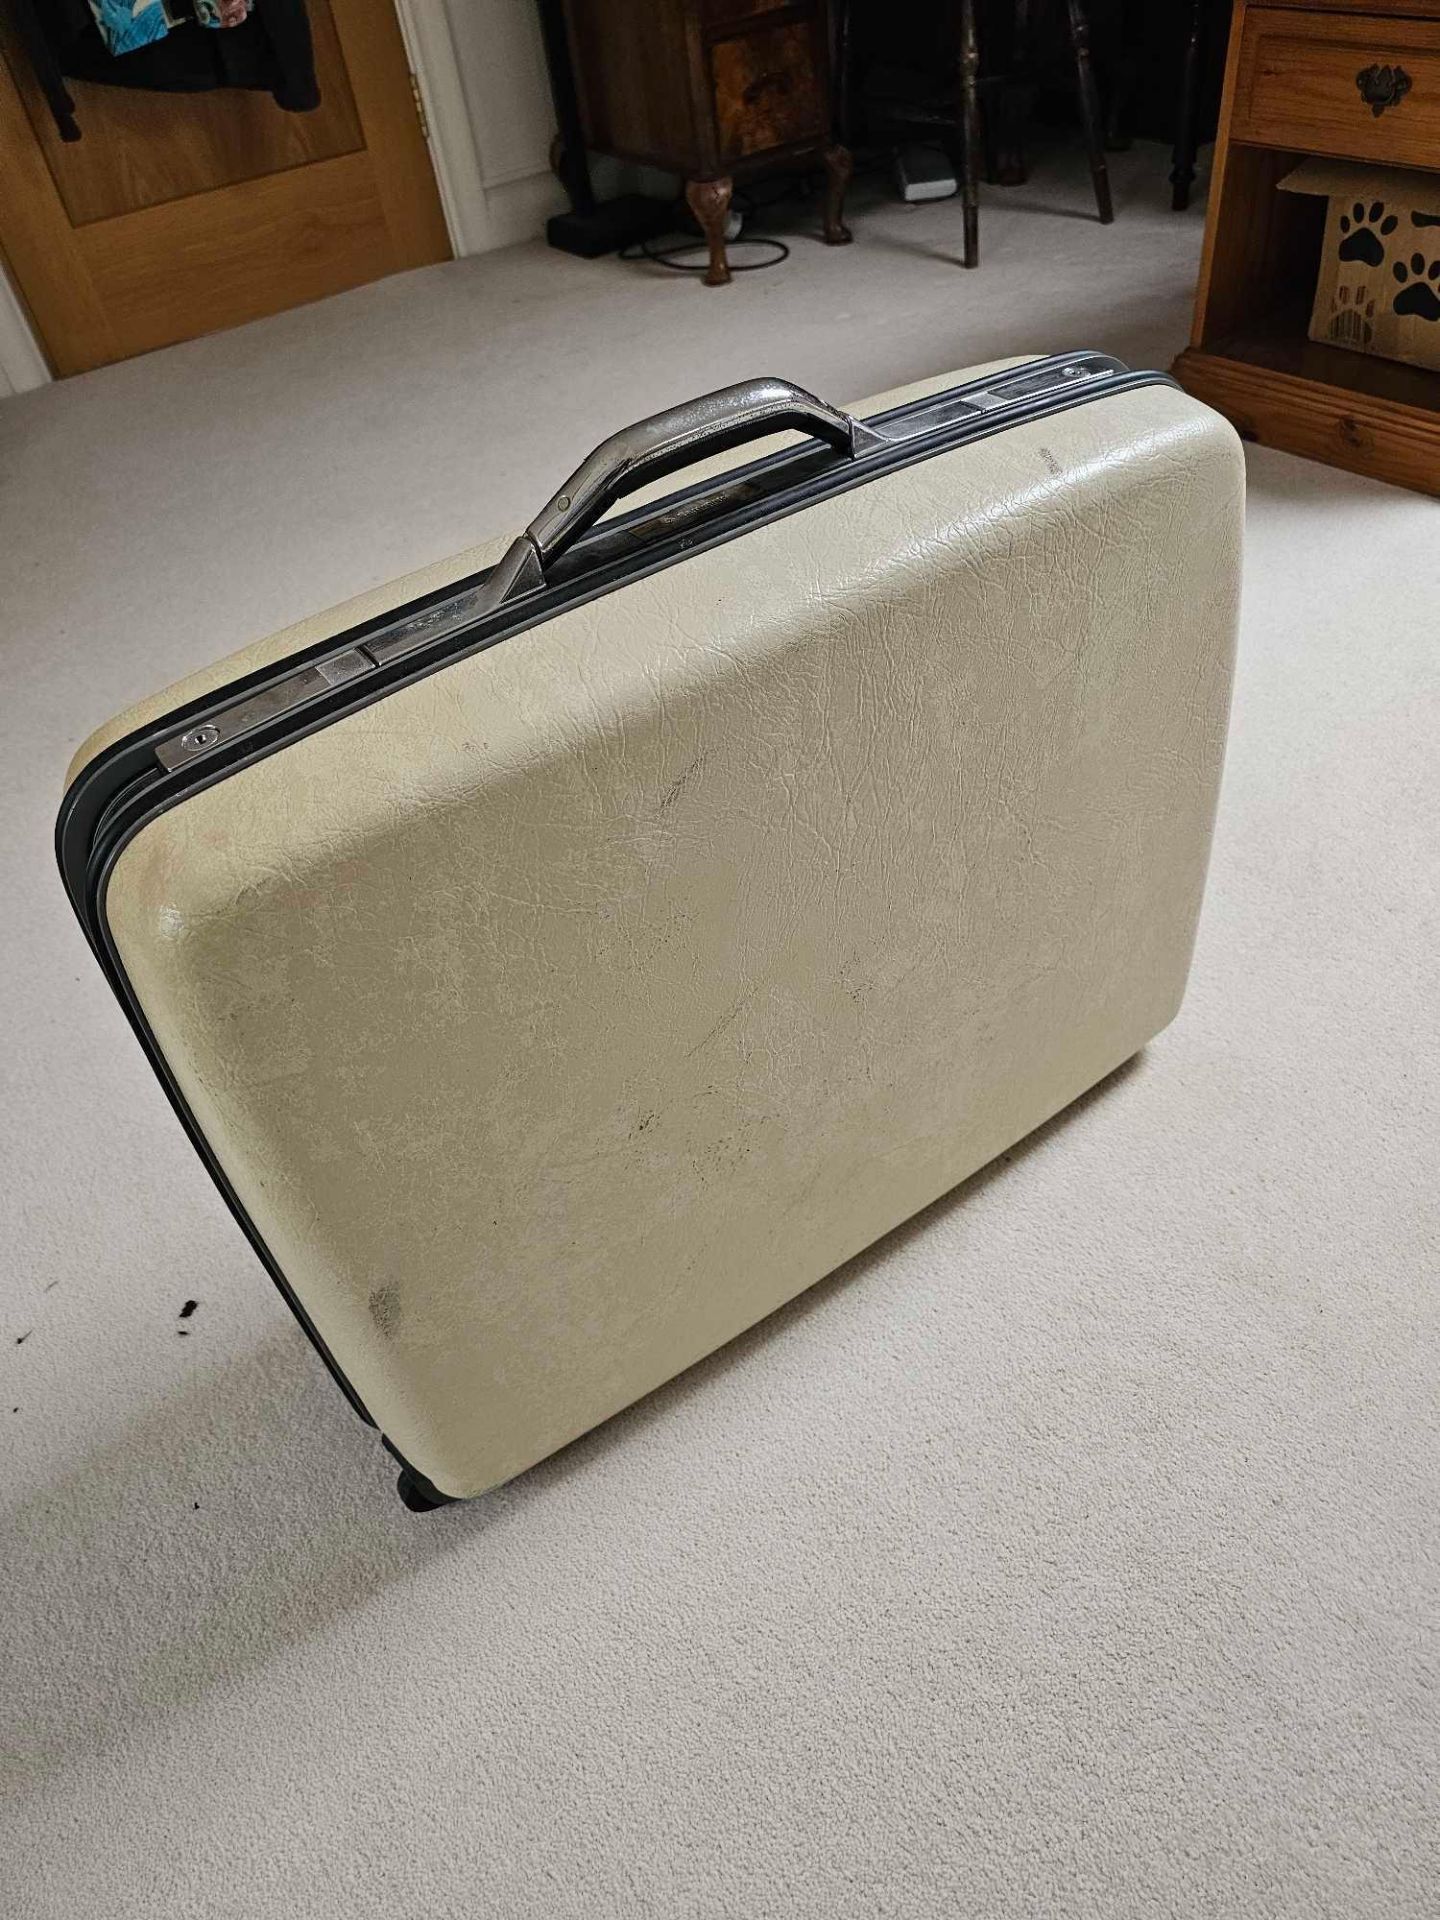 A Vintage 1960s Samsonite Silhouette Hard Shell Luggage Suitcase With Liner Intact - Bild 4 aus 4